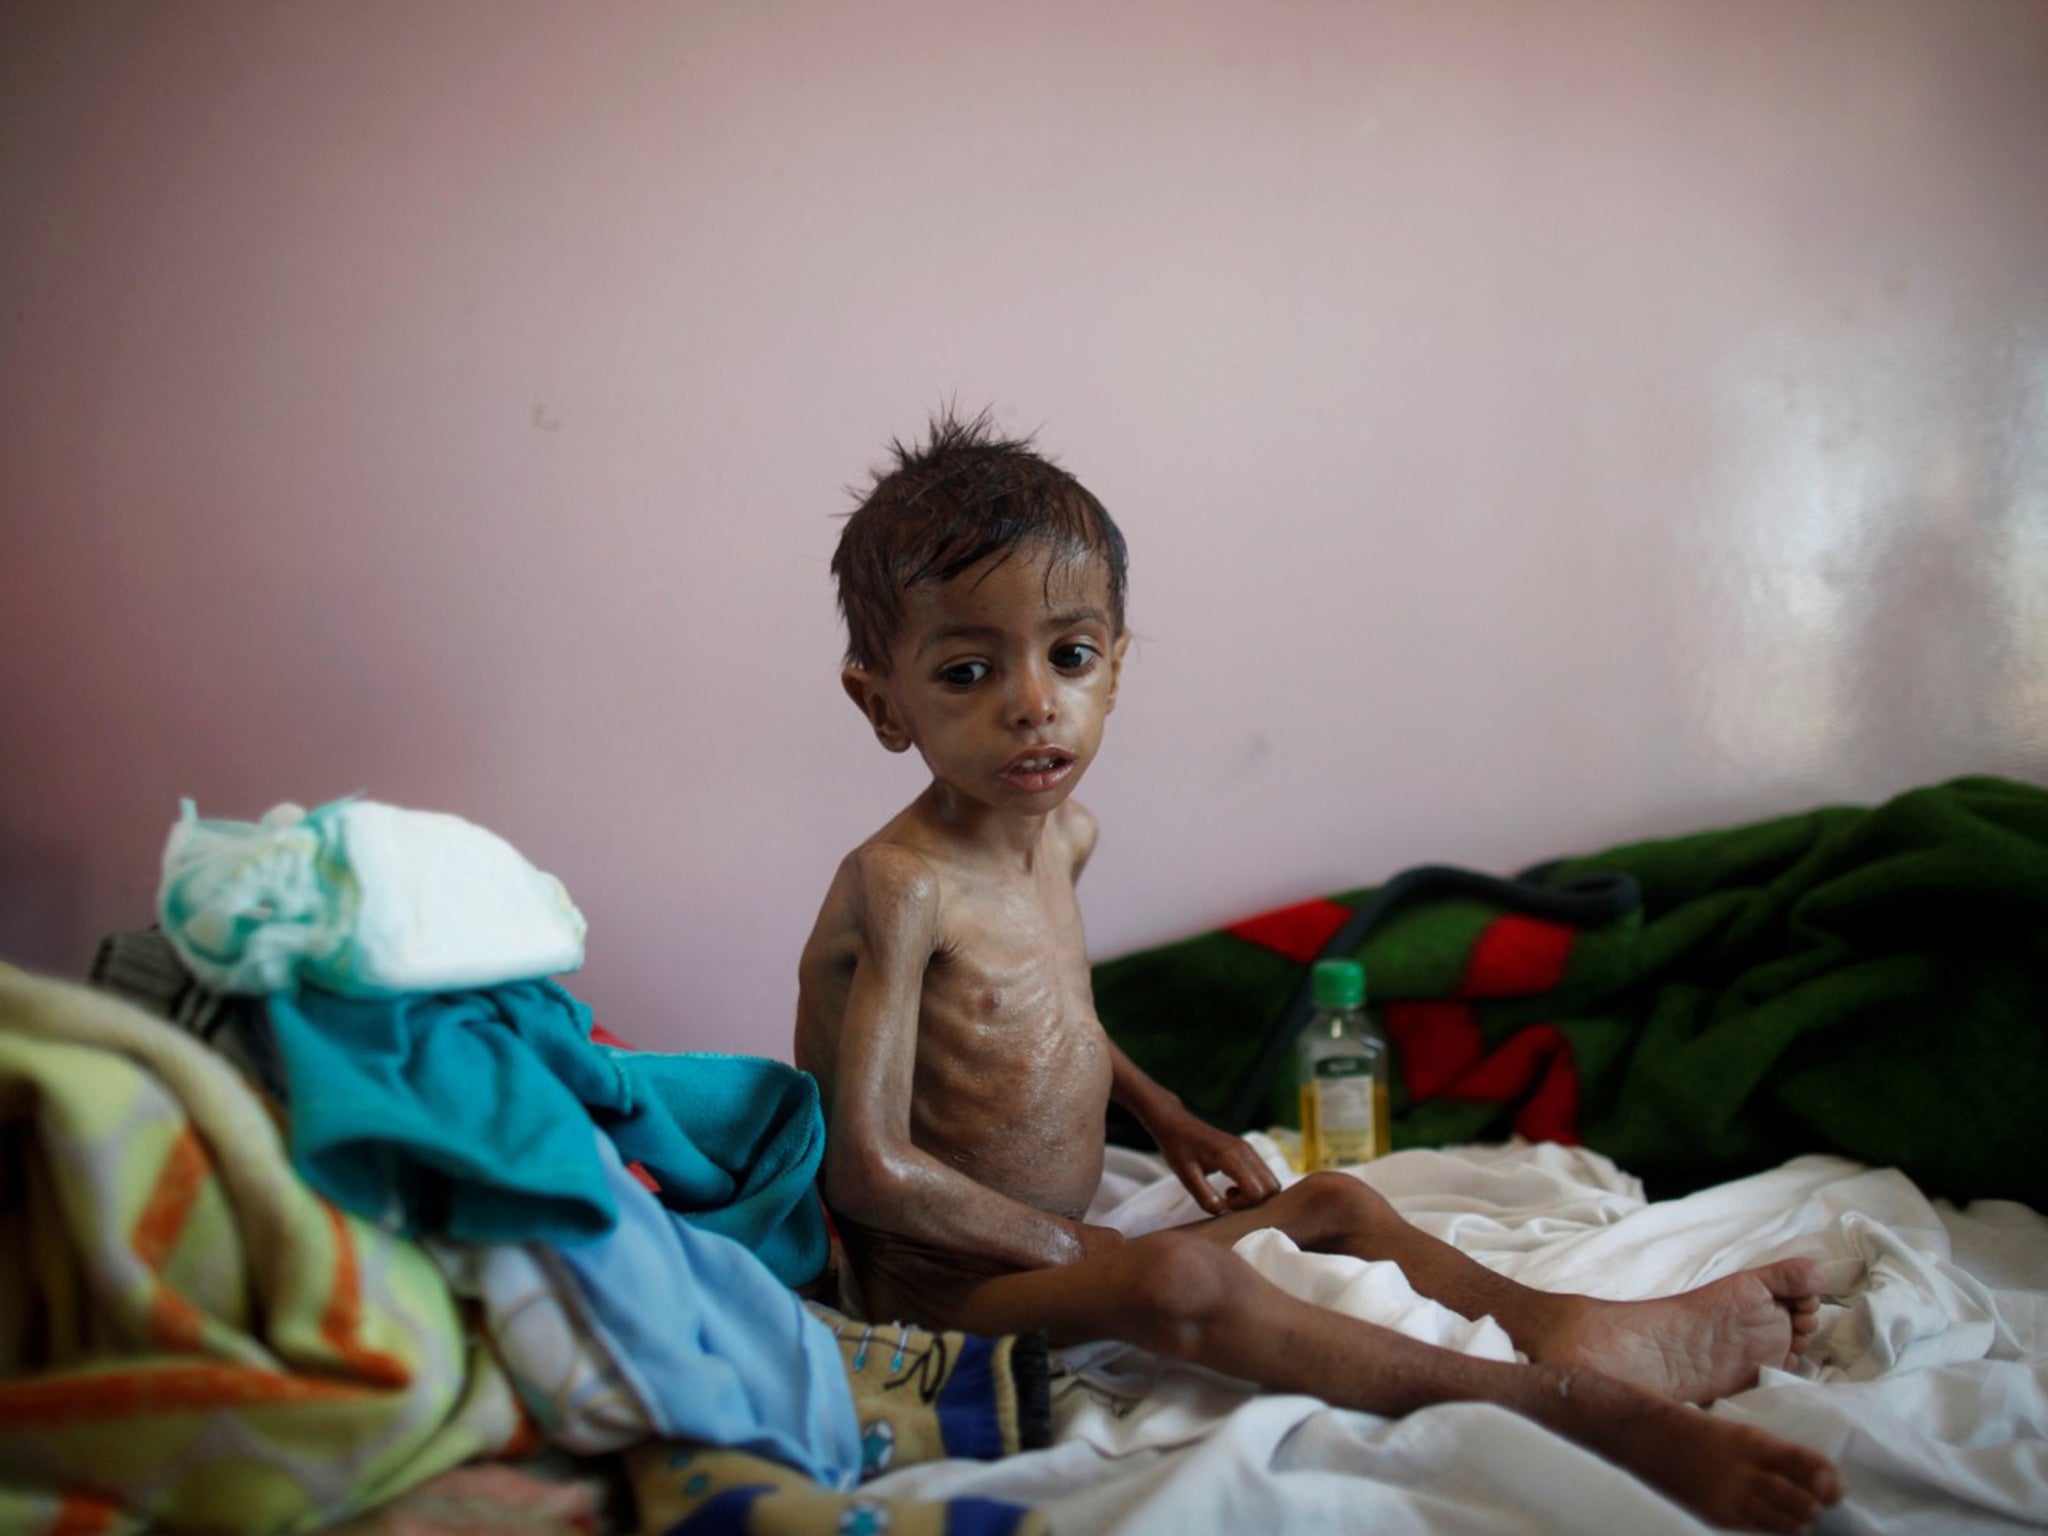 More than 370,000 children are at risk of starvation in Yemen alone